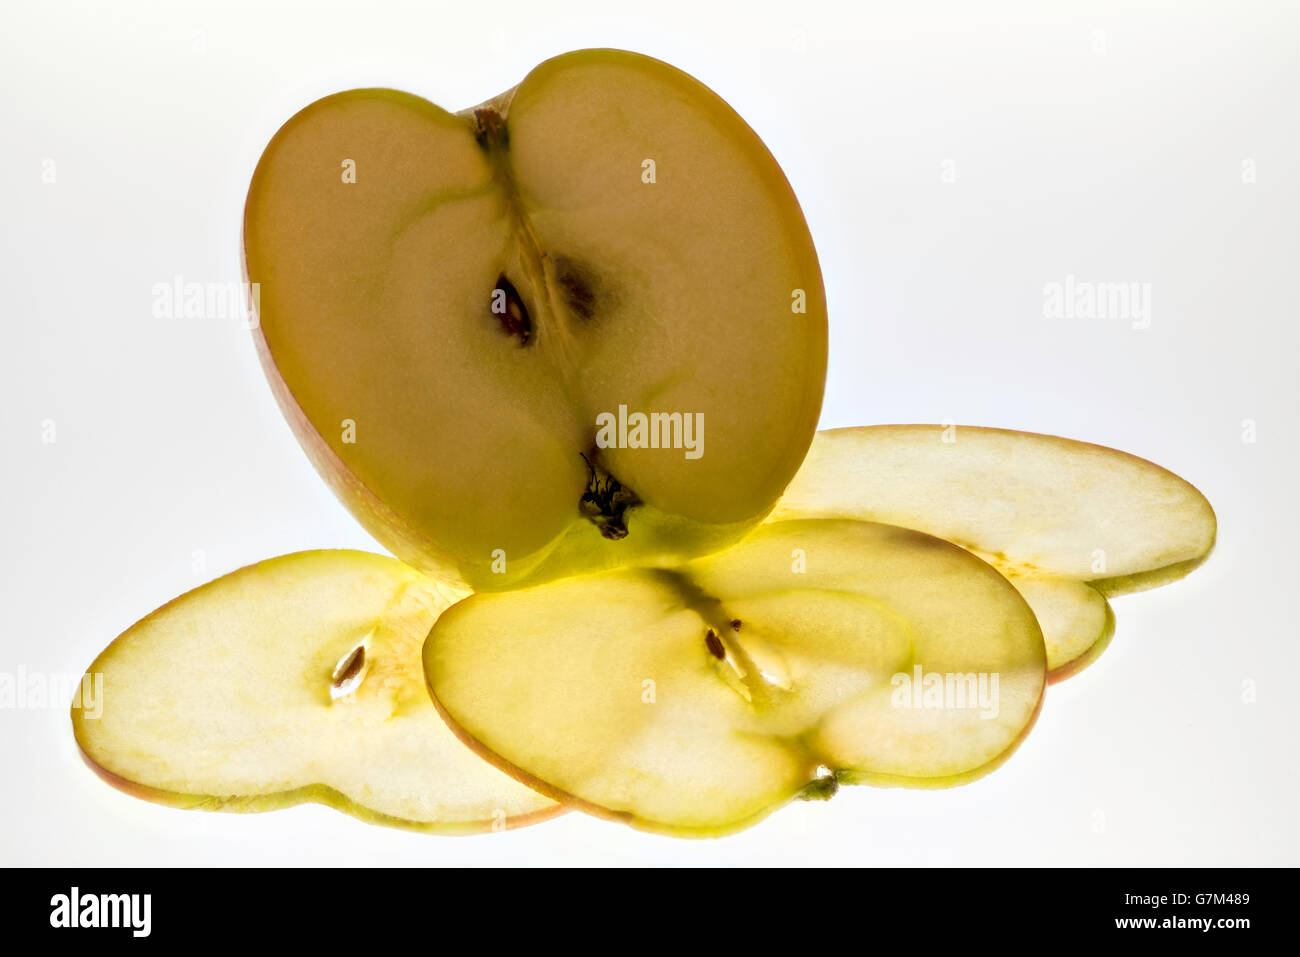 Food Art, Apple, macro depicting the fruits form and structure, isolated under studio lighting. Stock Photo